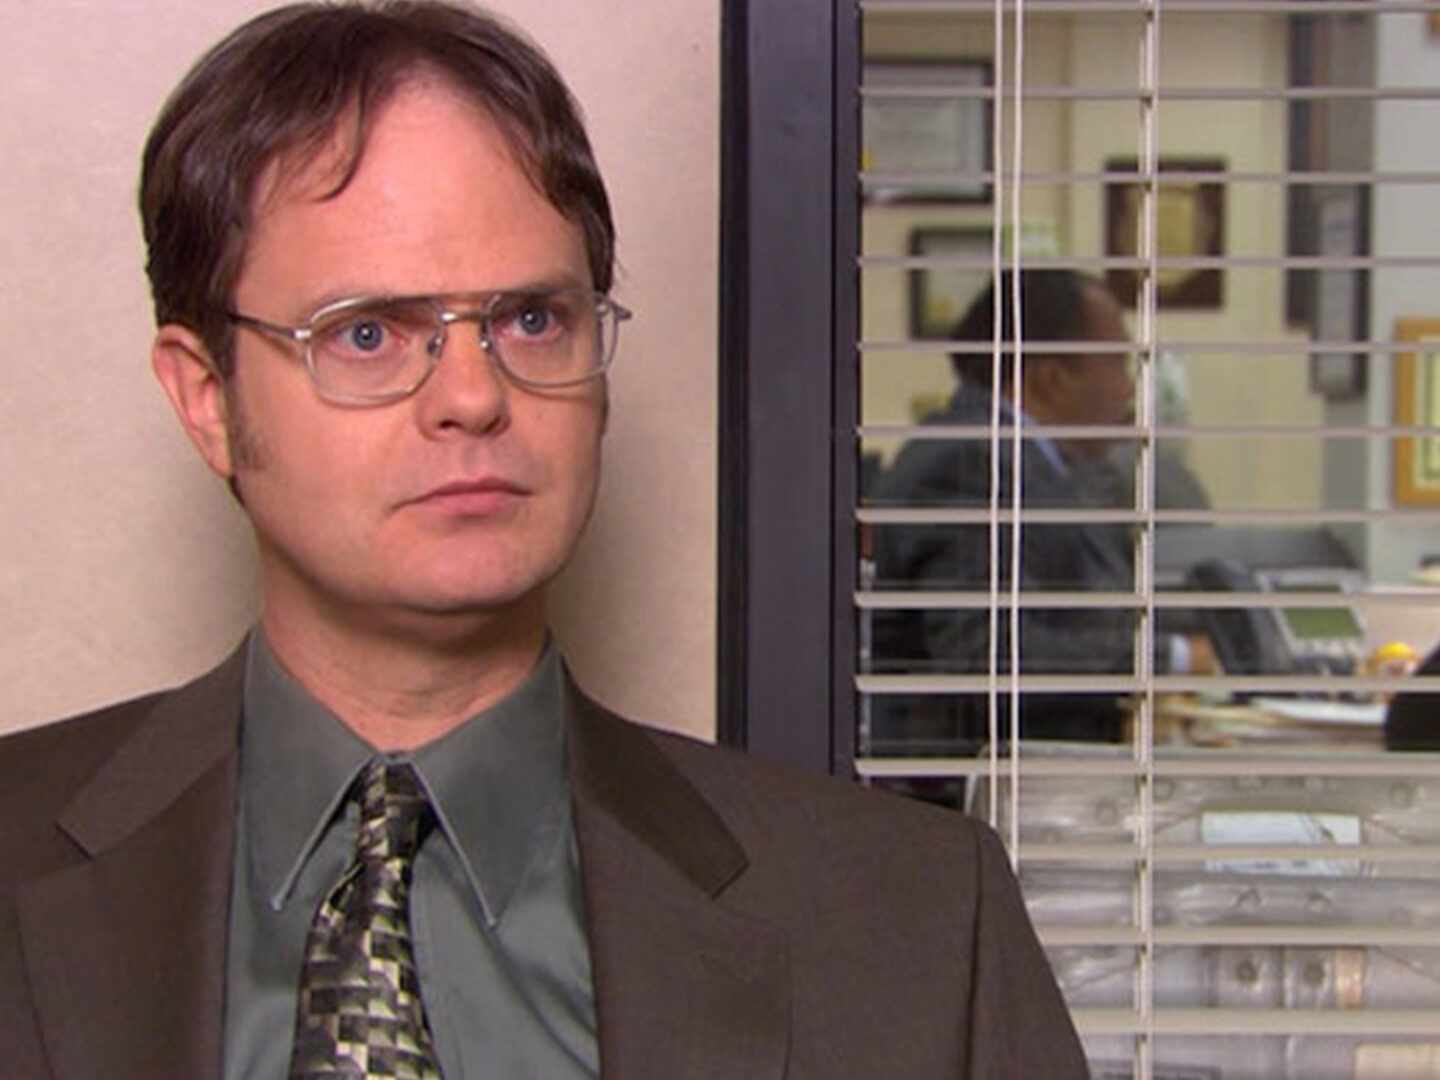 Rainn Wilson confesses he was not happy filming ‘The Office’